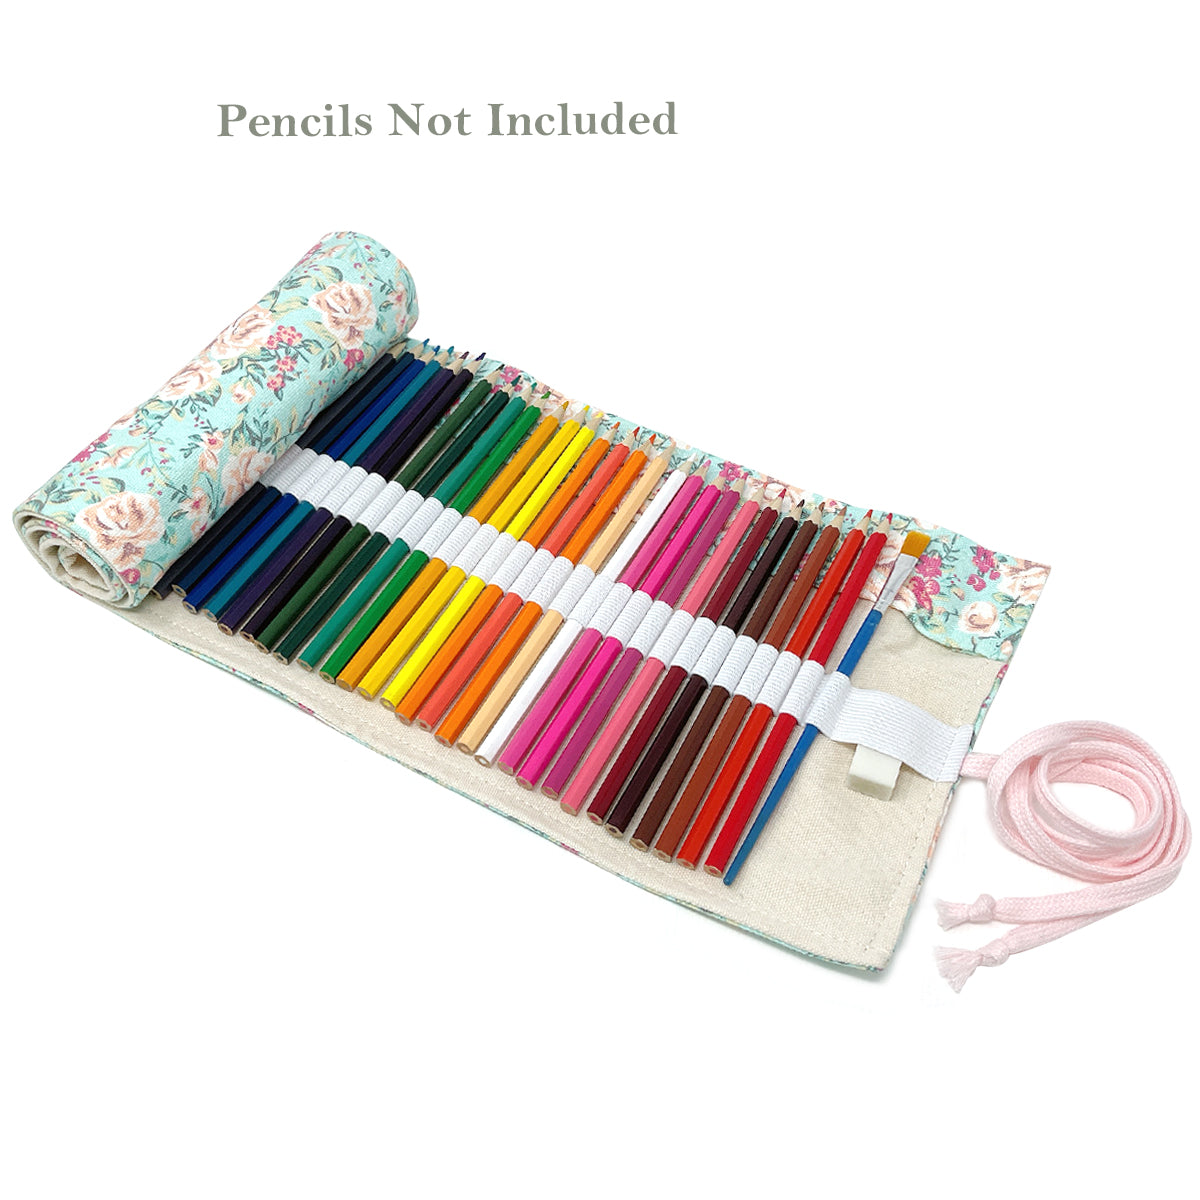 Wrapables Large Capacity 72 Slot Pencil Case for Colored Pencils